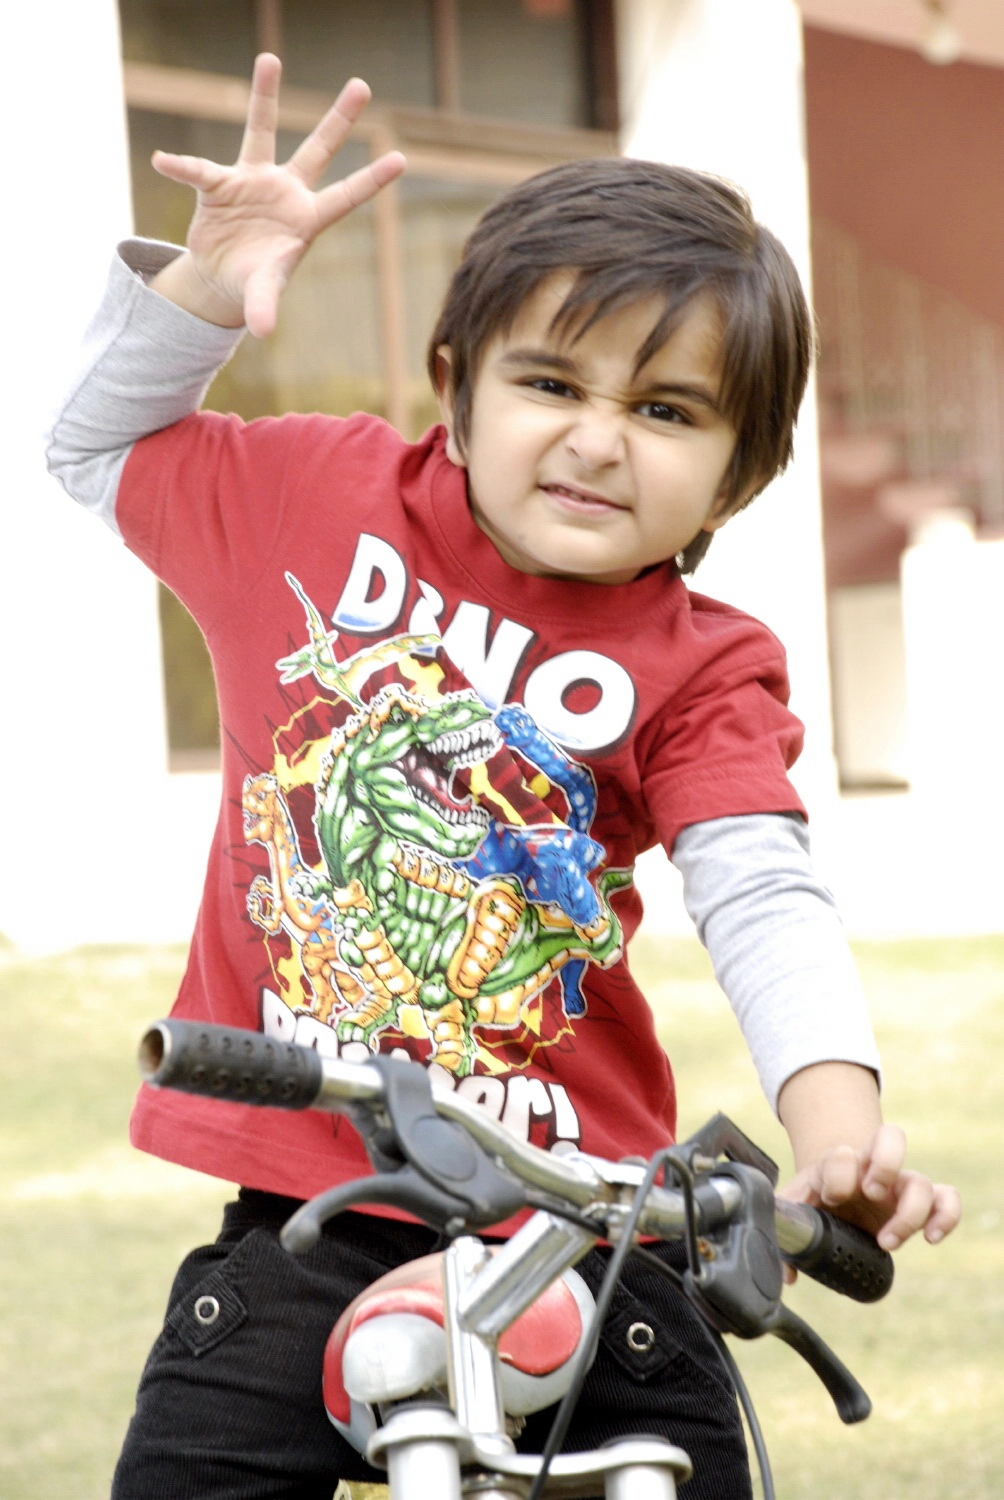 Cute Baby Boy with Bicycle, Adolescence, Portrait, Kid, Laughing, HQ Photo